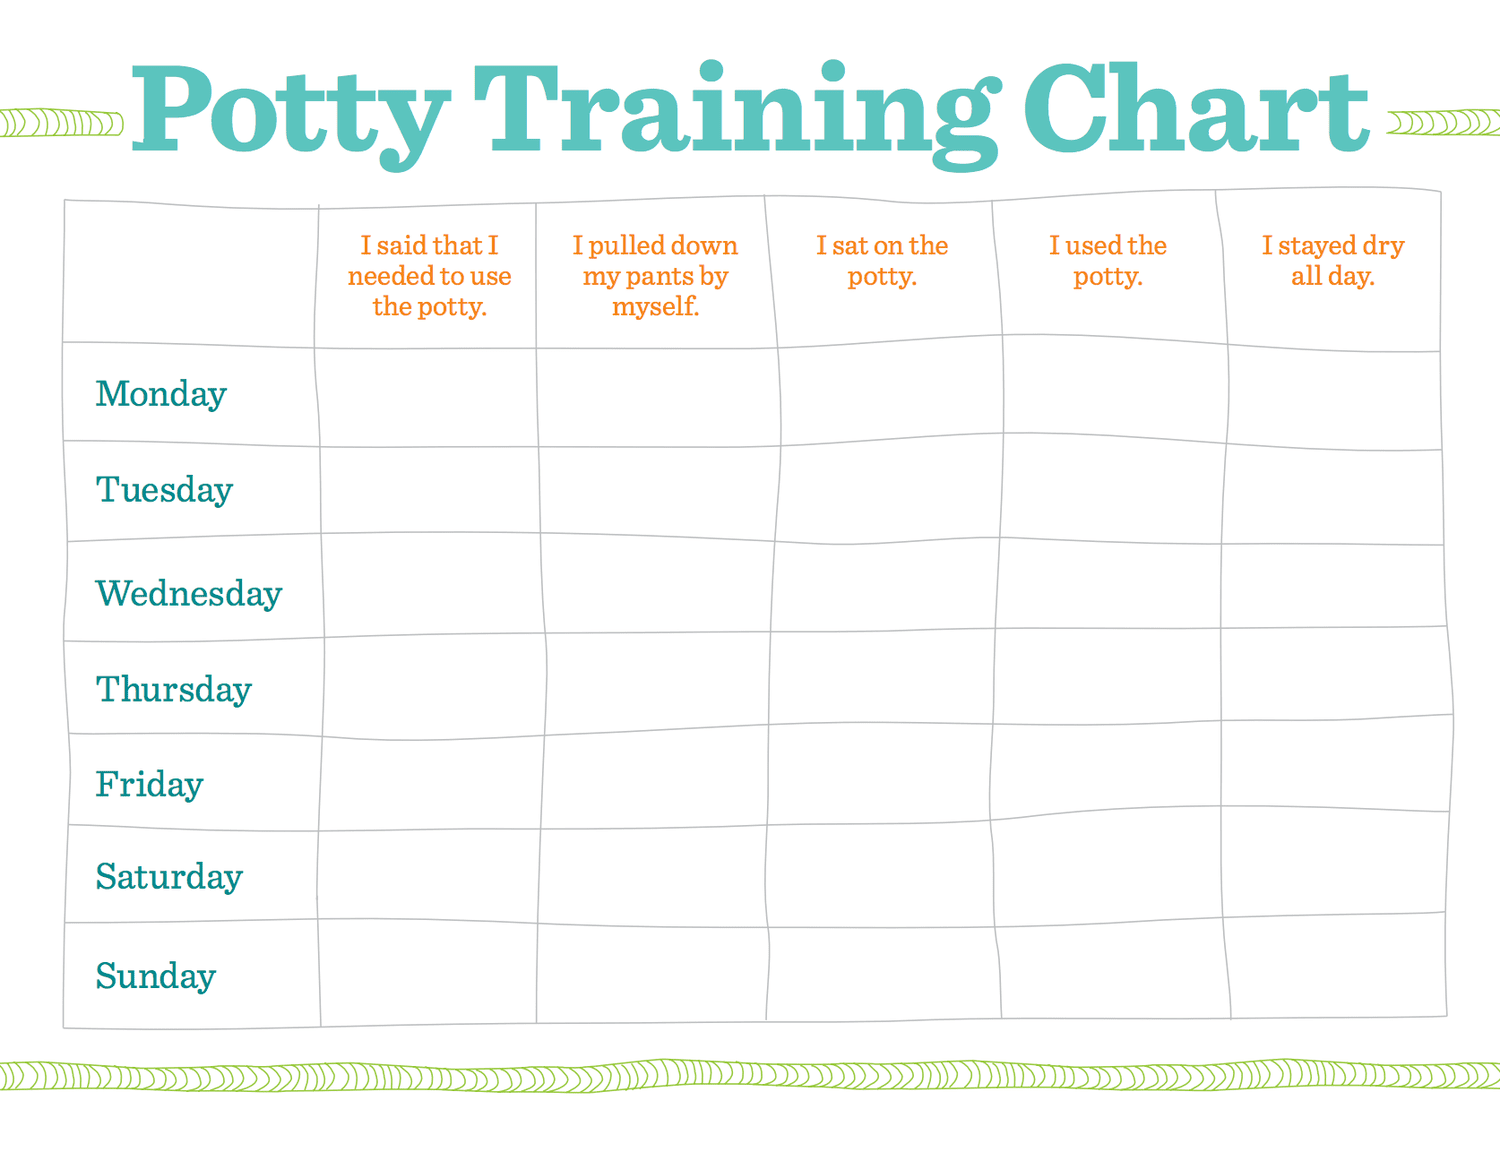 And Potty Training Chart